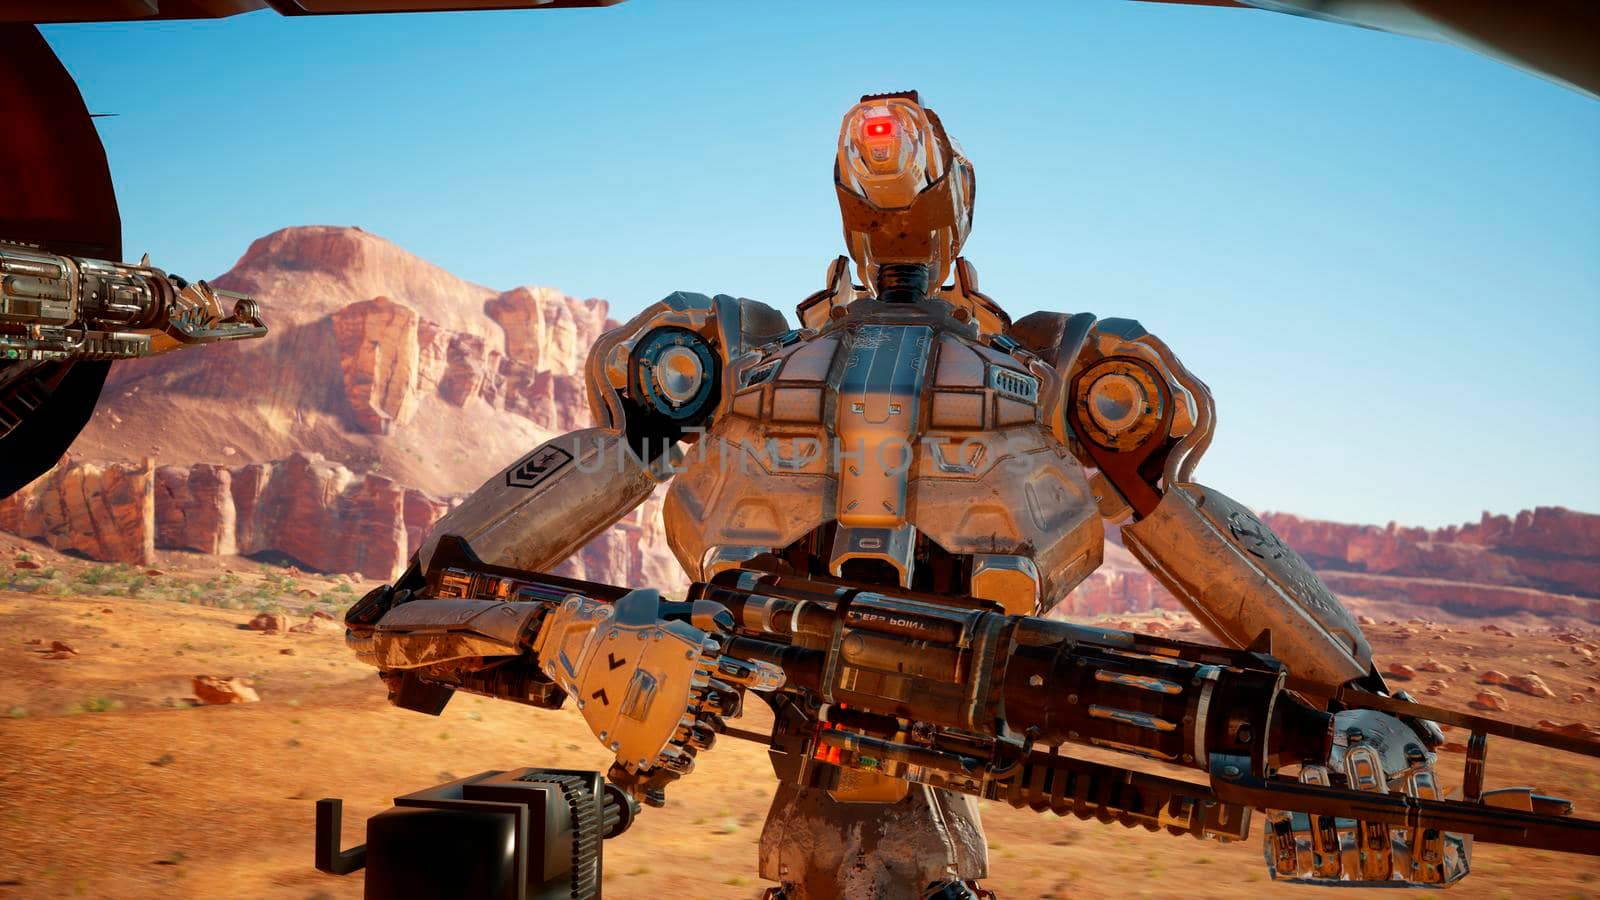 Military robot-android in the desert surveys the territory. 3D Rendering. by designprojects